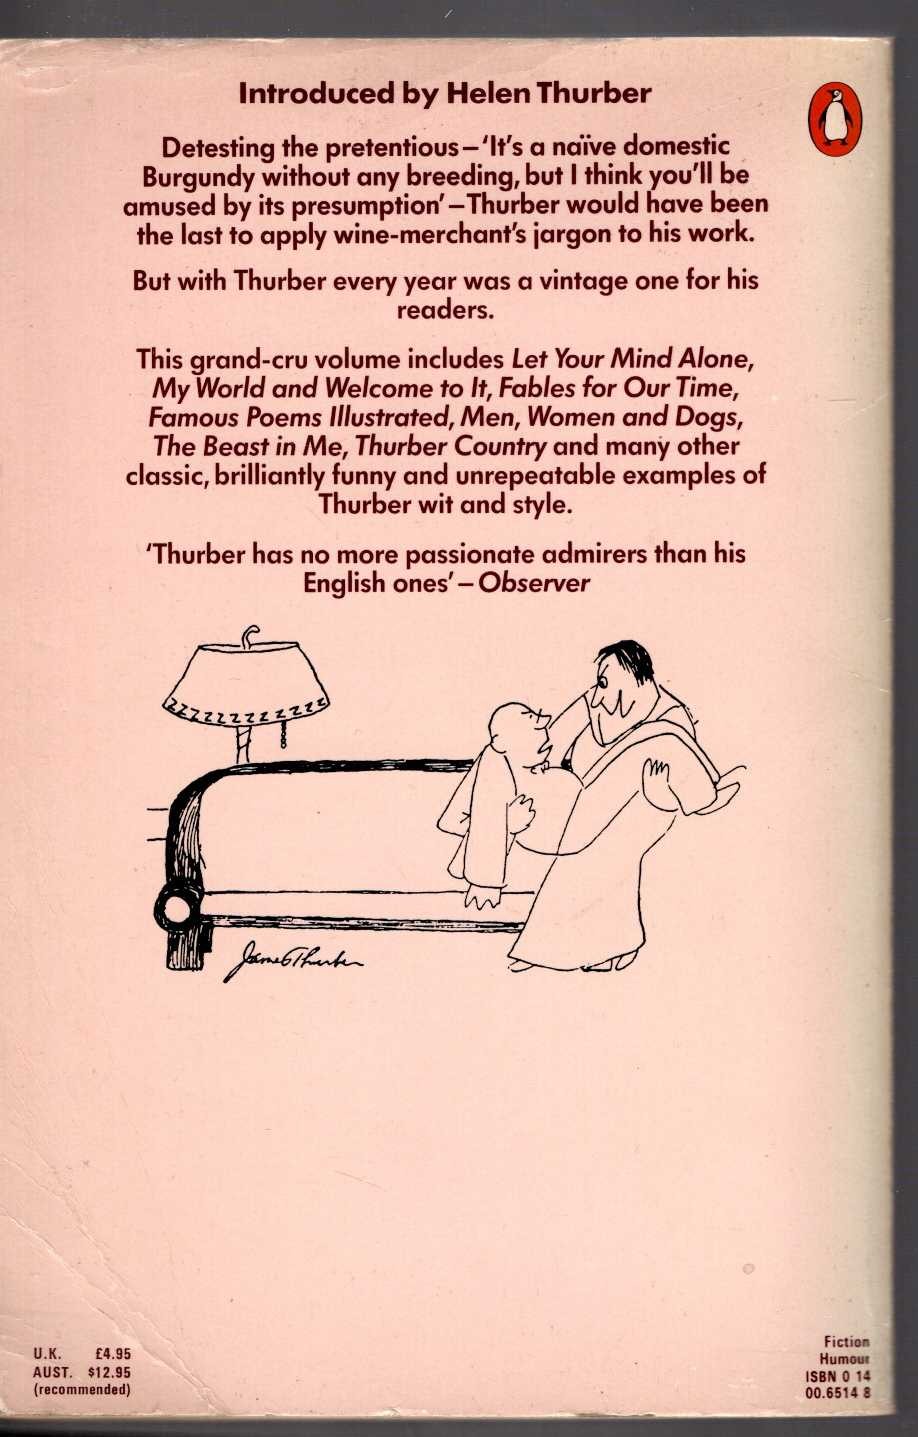 James Thurber (Illus.) VINTAGE THURBER Volume 1 magnified rear book cover image